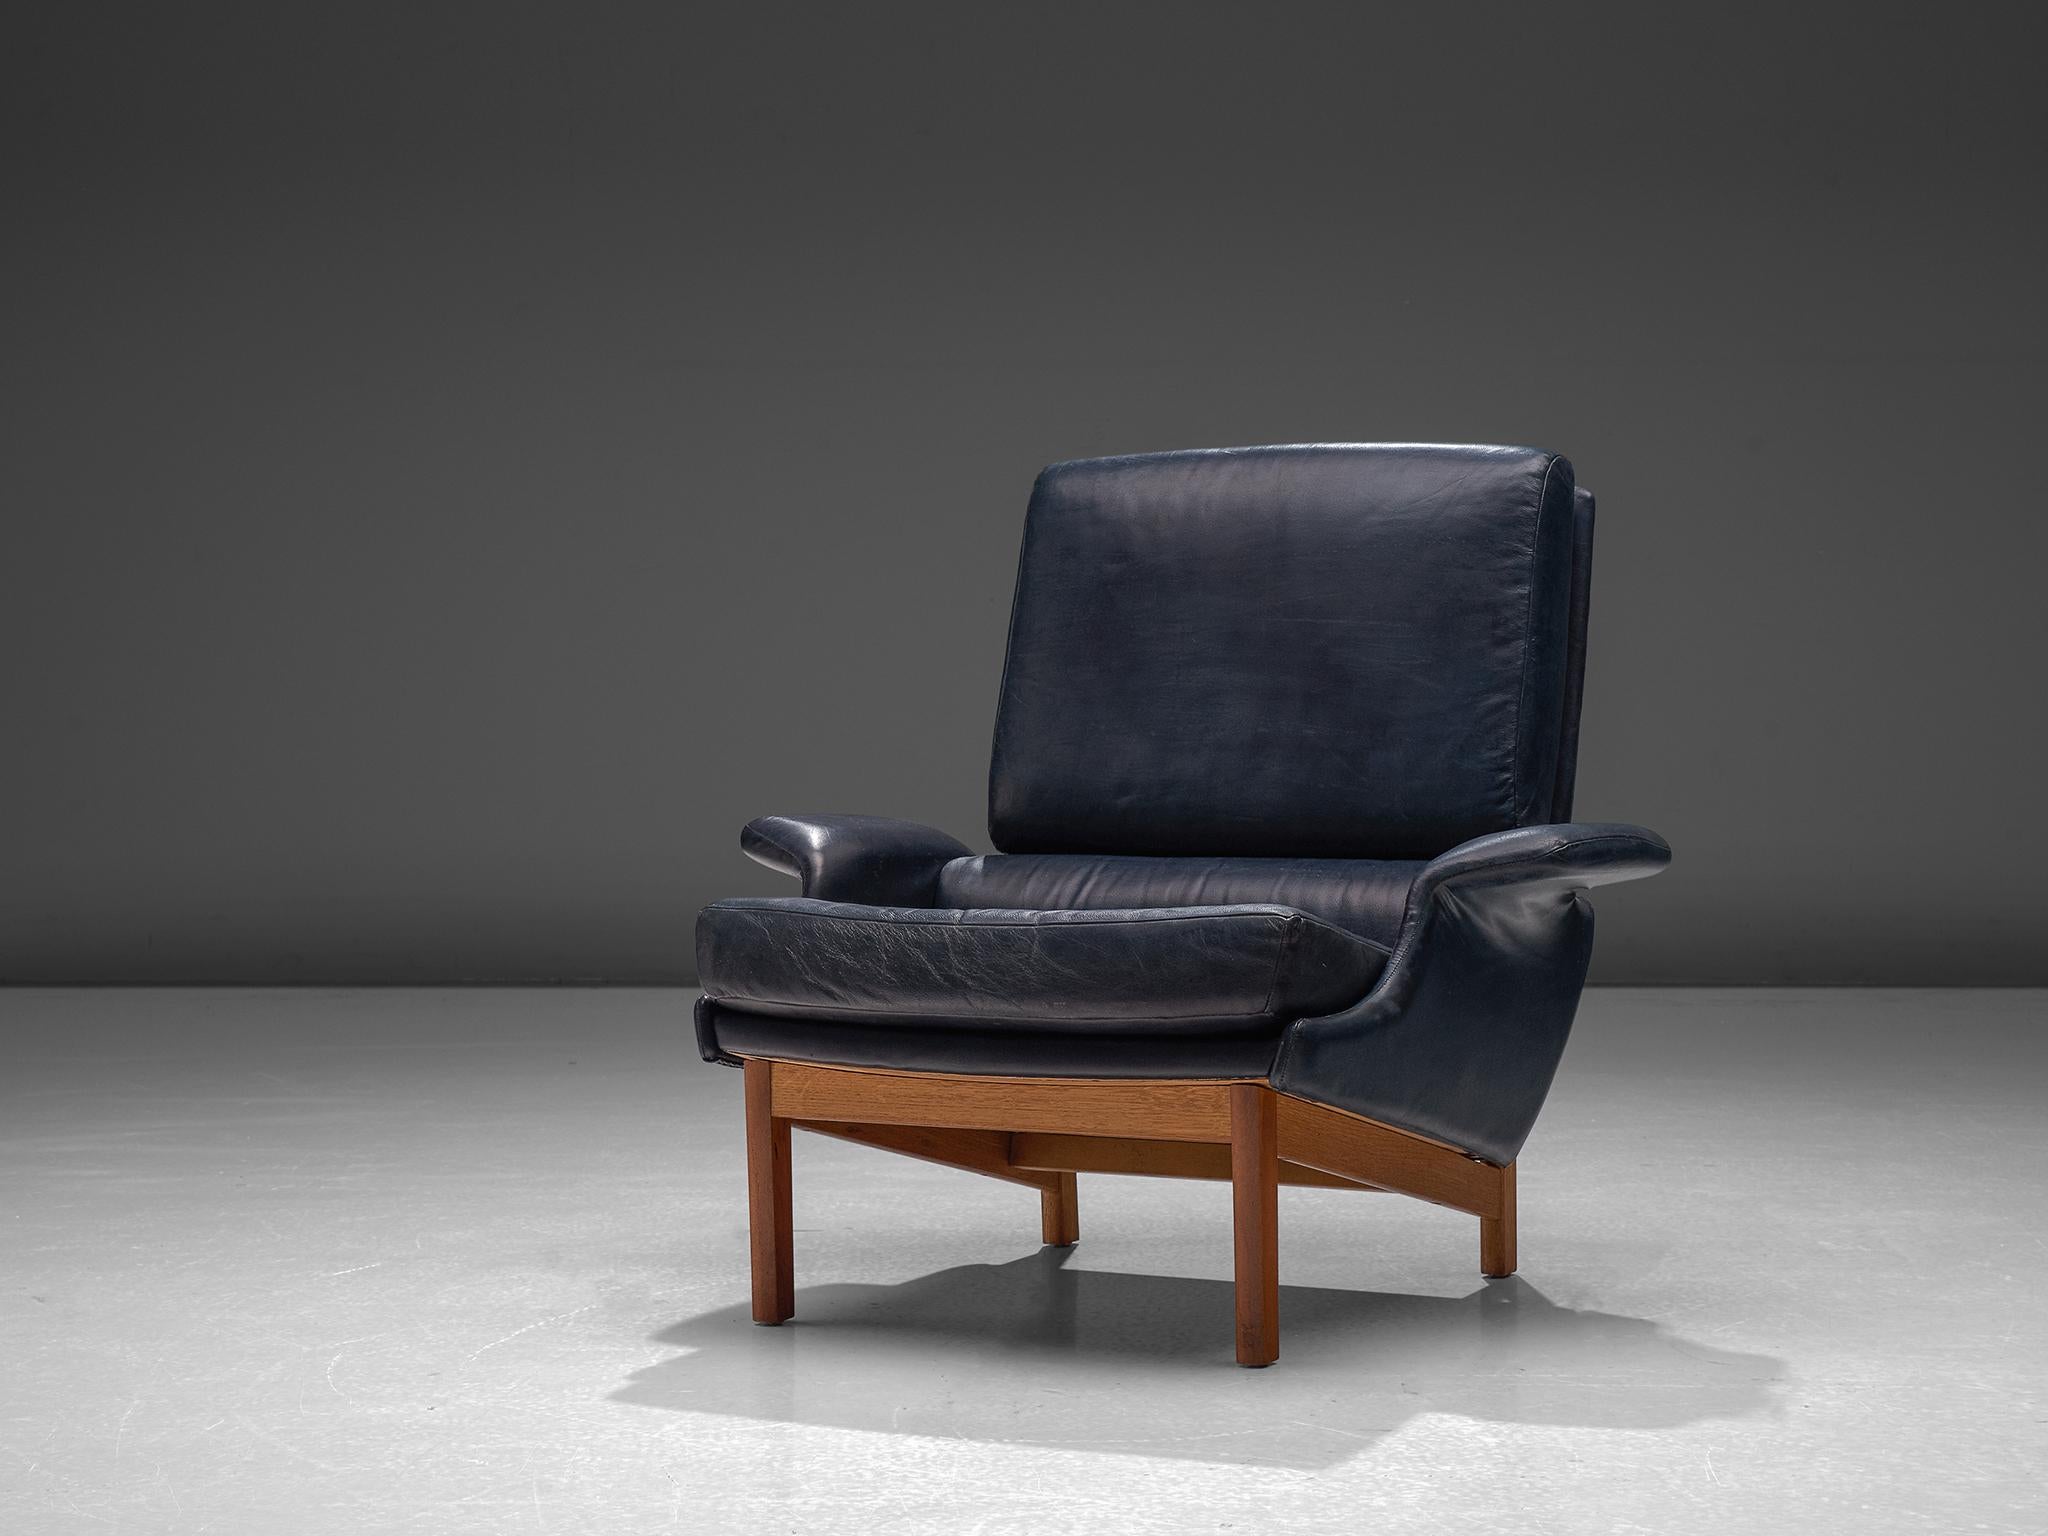 Adam lounge chair, in leather and teak, by Ib Kofod-Larsen for Mogens Kold Møbelfabrik, Denmark, 1958.

This extraordinary and very comfortable set of lounge chairs have a tight and clean body with the folded well known 'wing' armrests. The